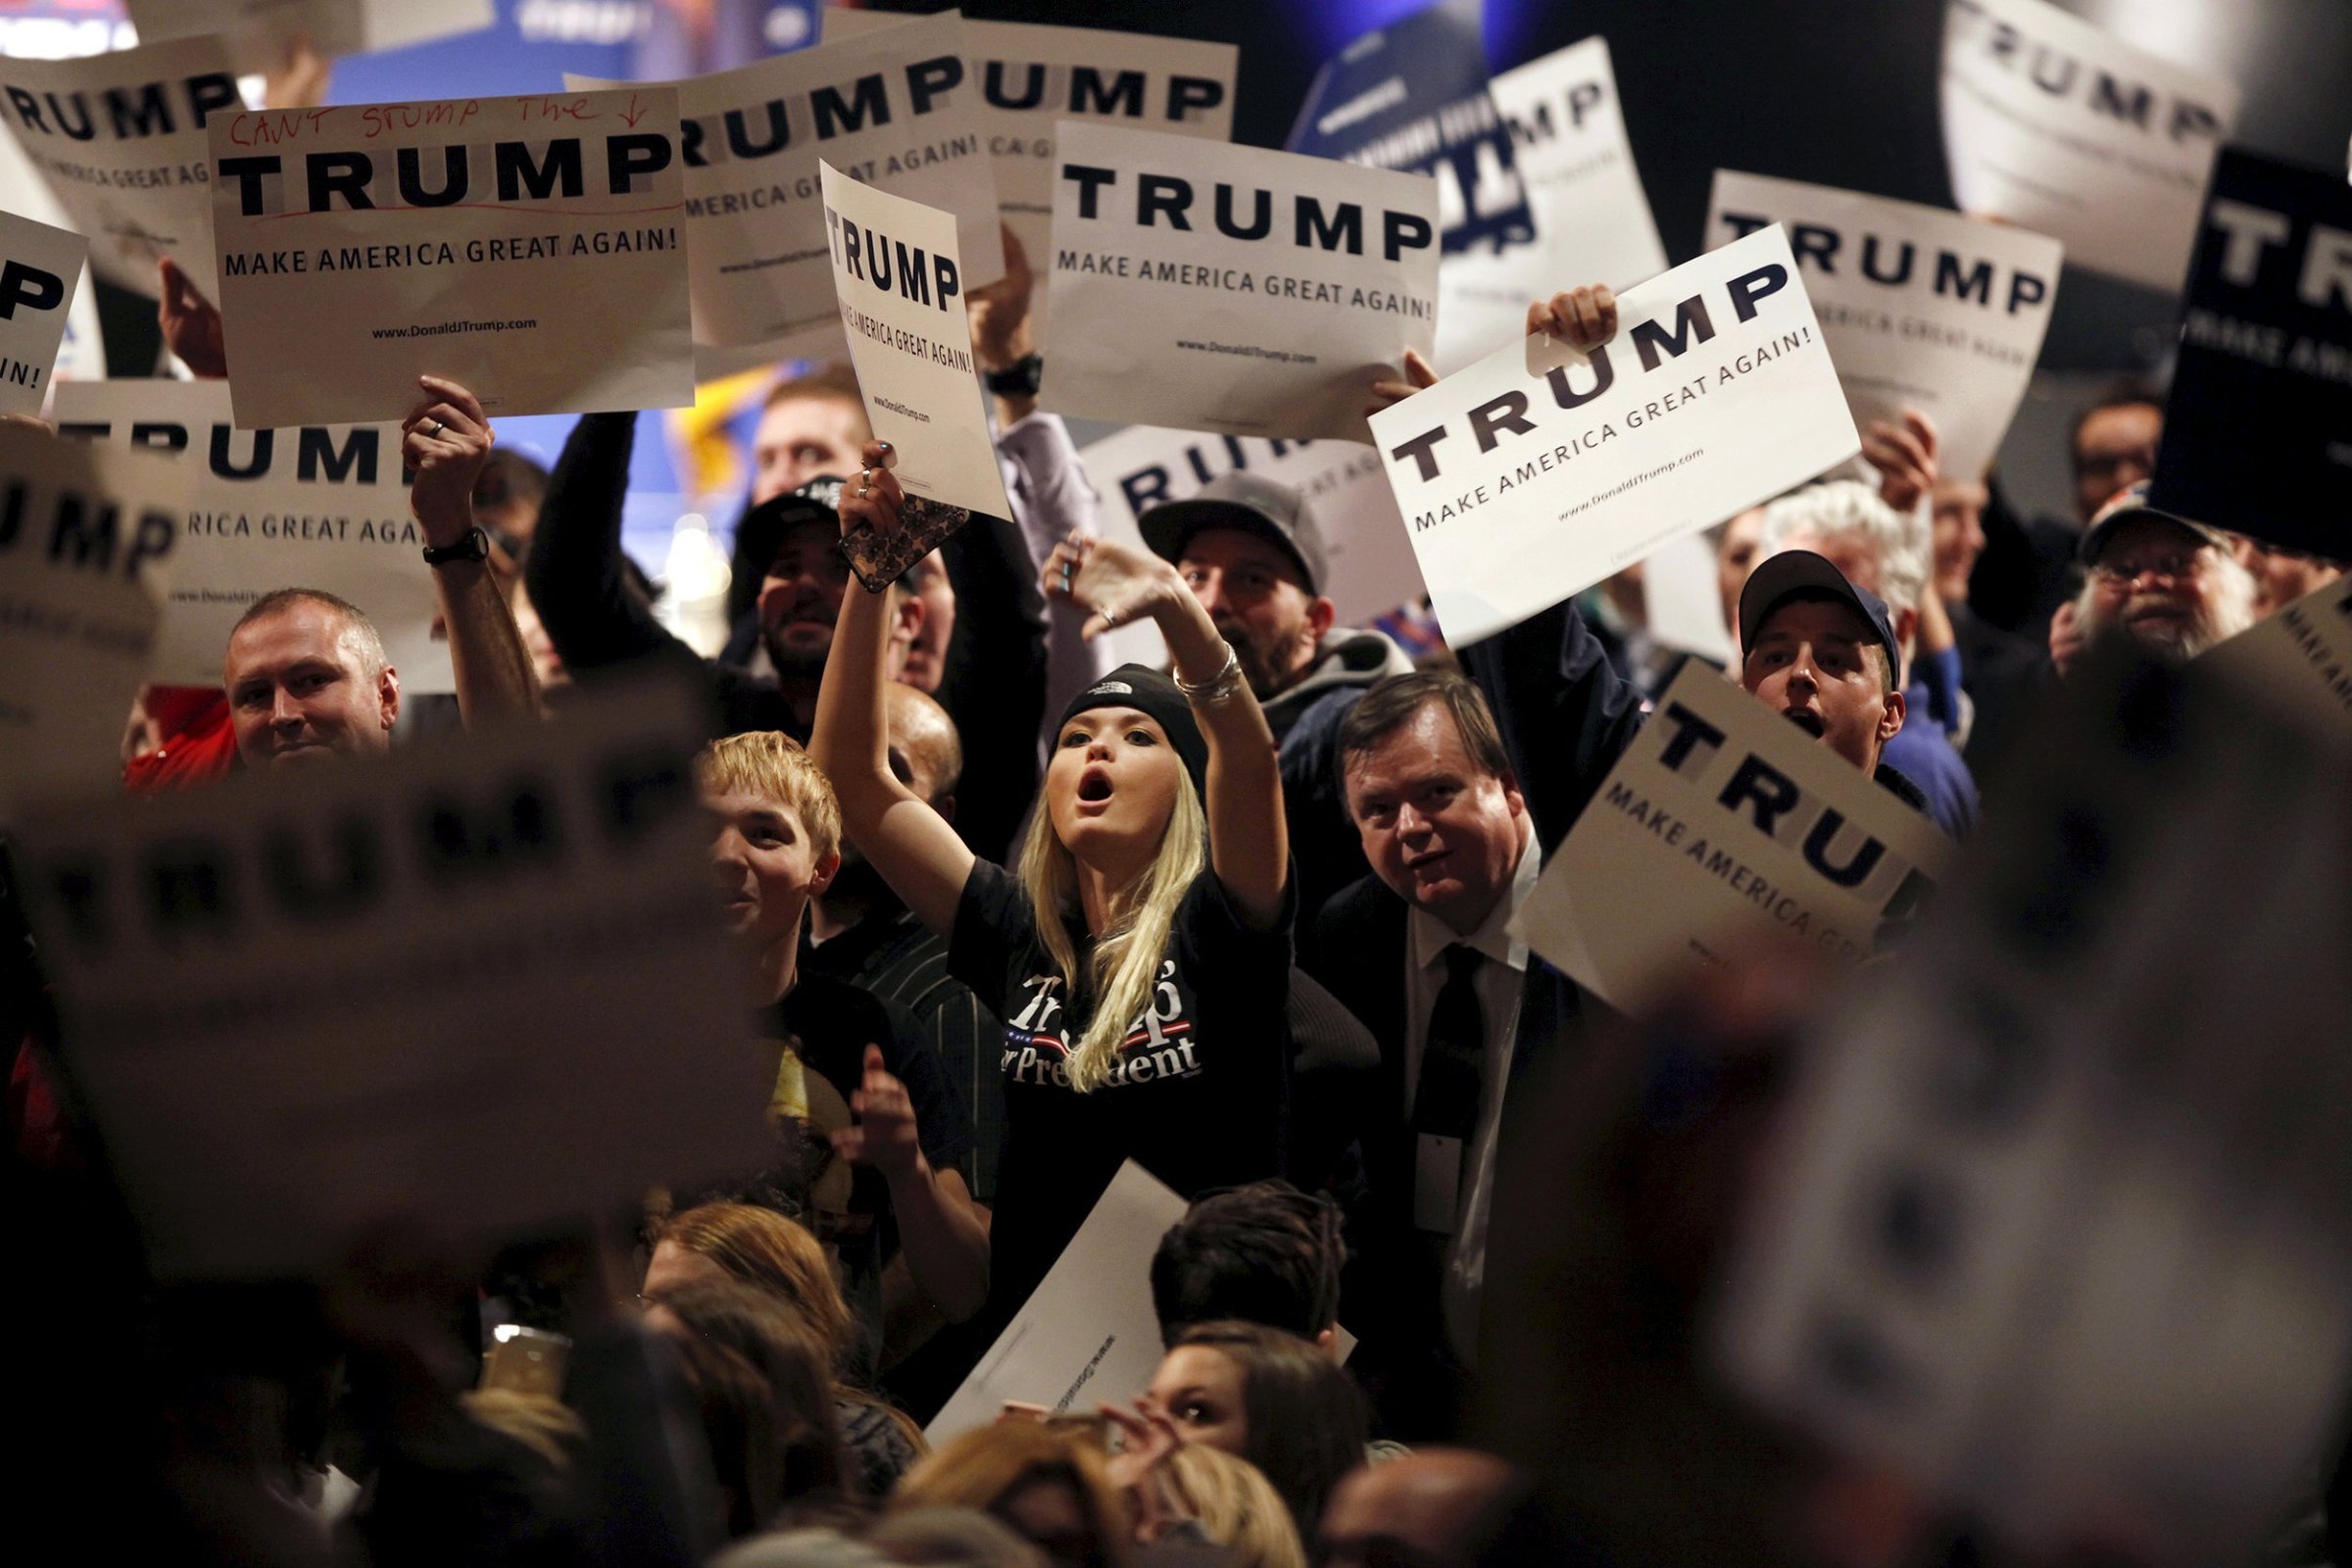 Supporters of U.S. Republican presidential candidate Donald Trump jeer at protesters during a campaign rally in Burlington, Vt. on Jan. 7, 2016.